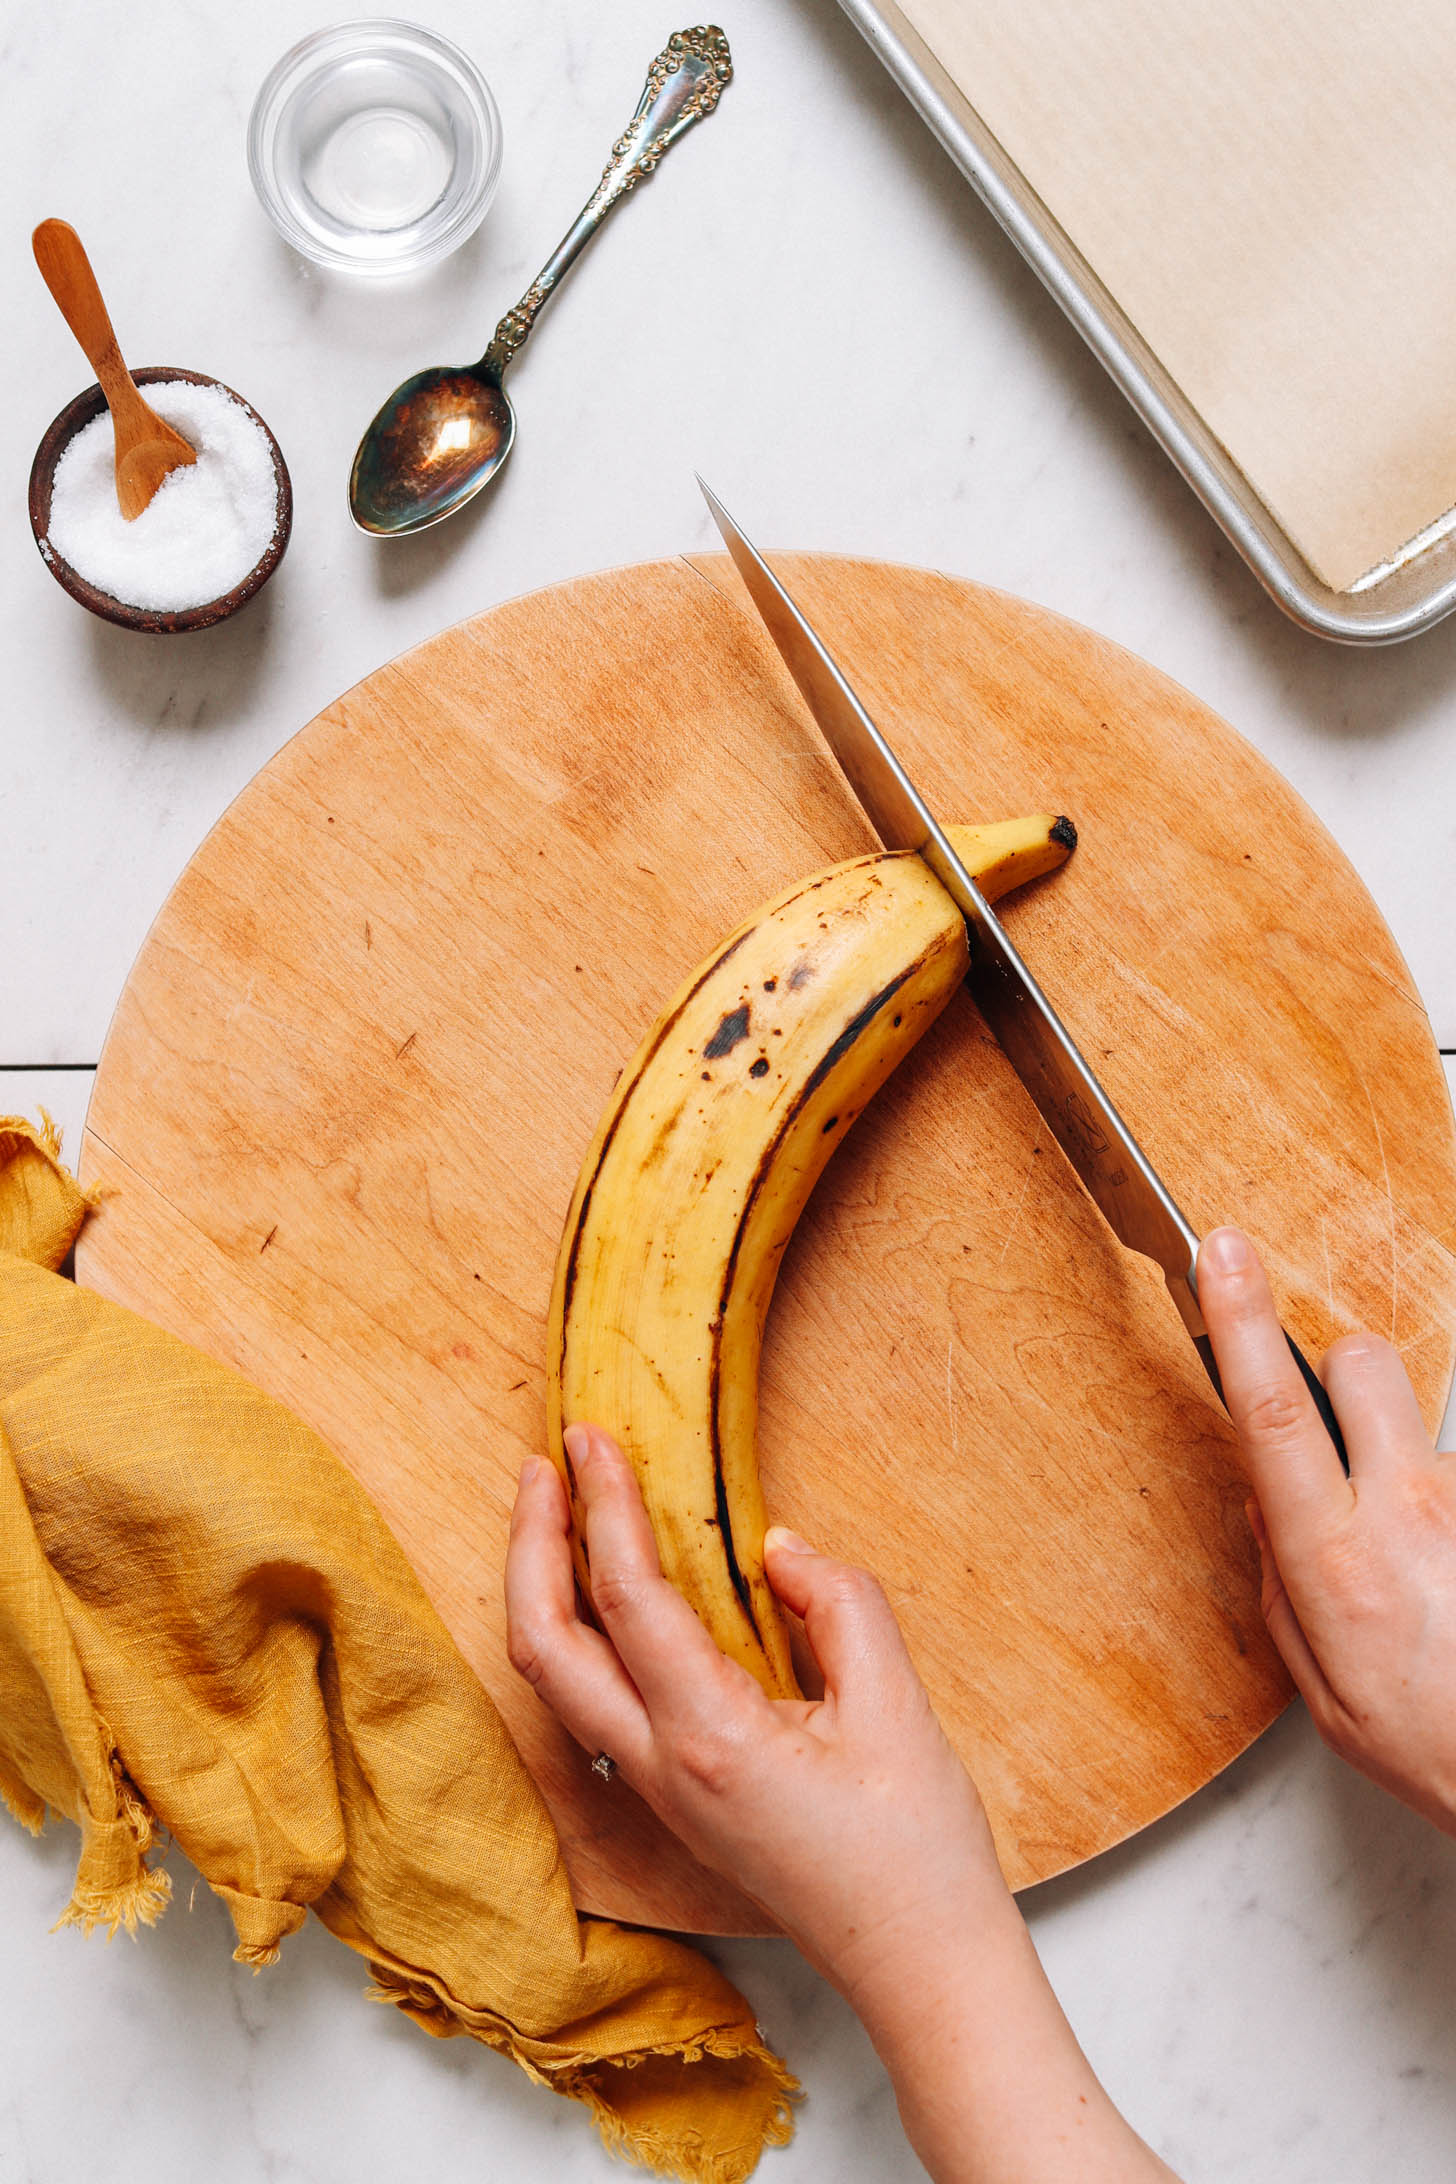 Slicing the end off of a plantain